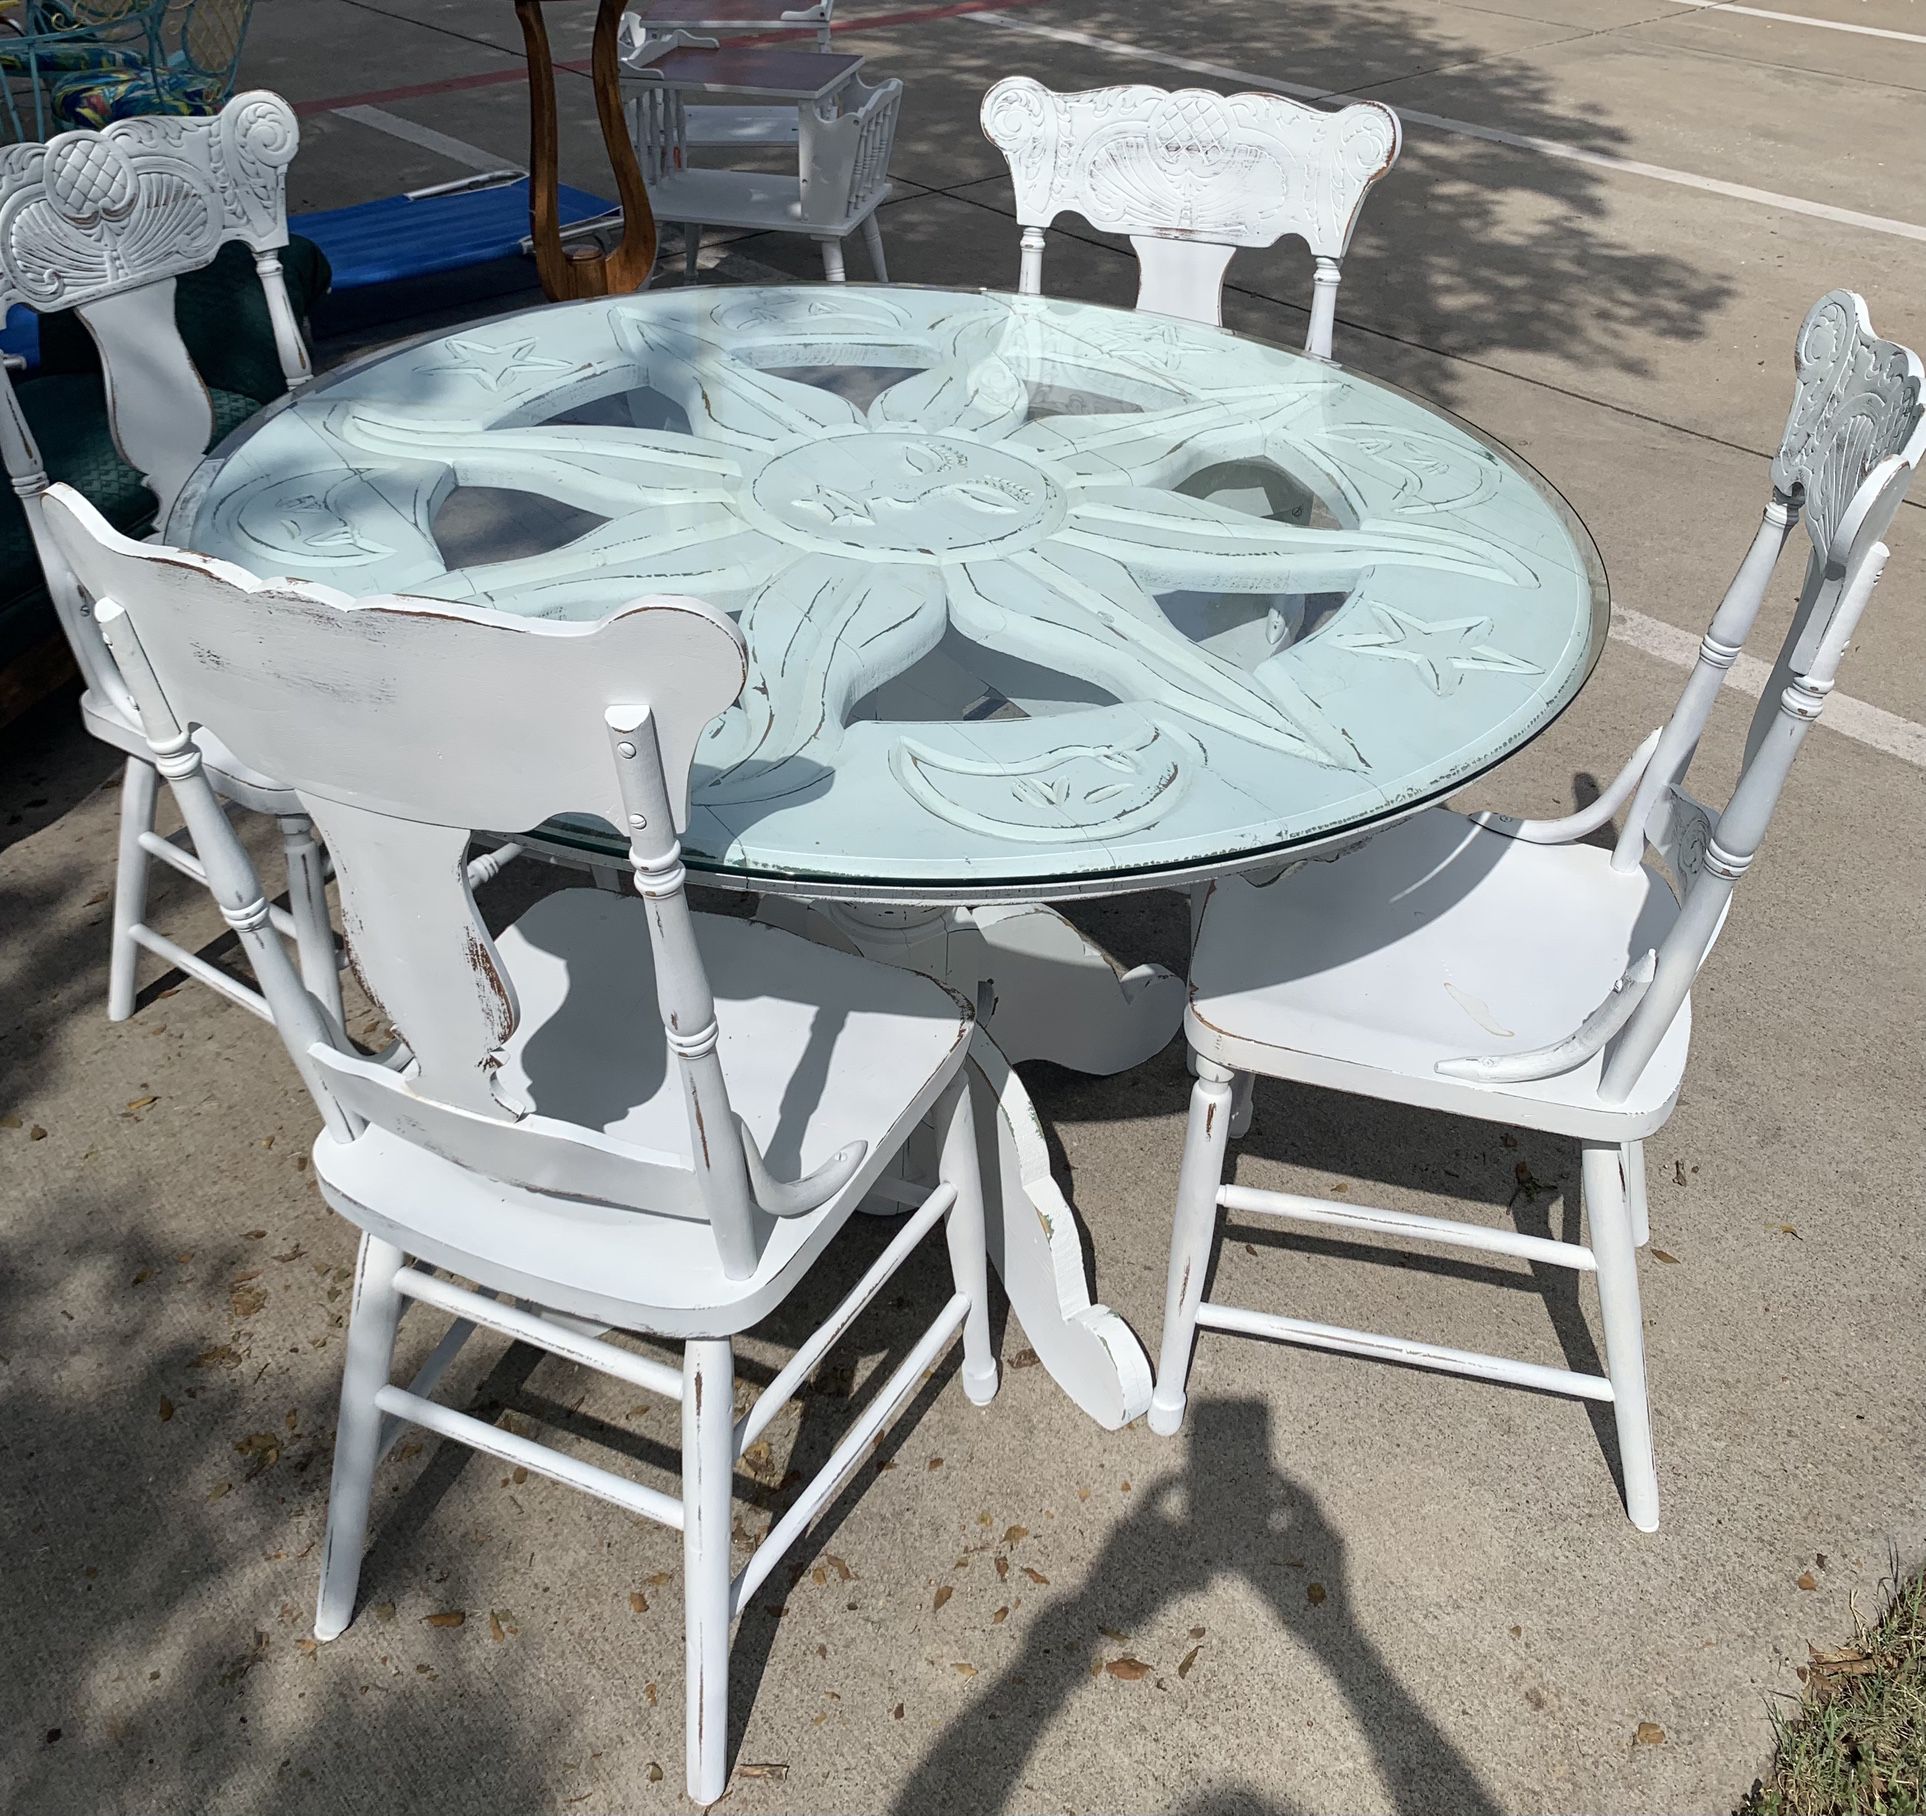 Savory Farm House Style, Distressed Sundial Pedestal Table With A Glass Top And 4 Distressed White Chairs